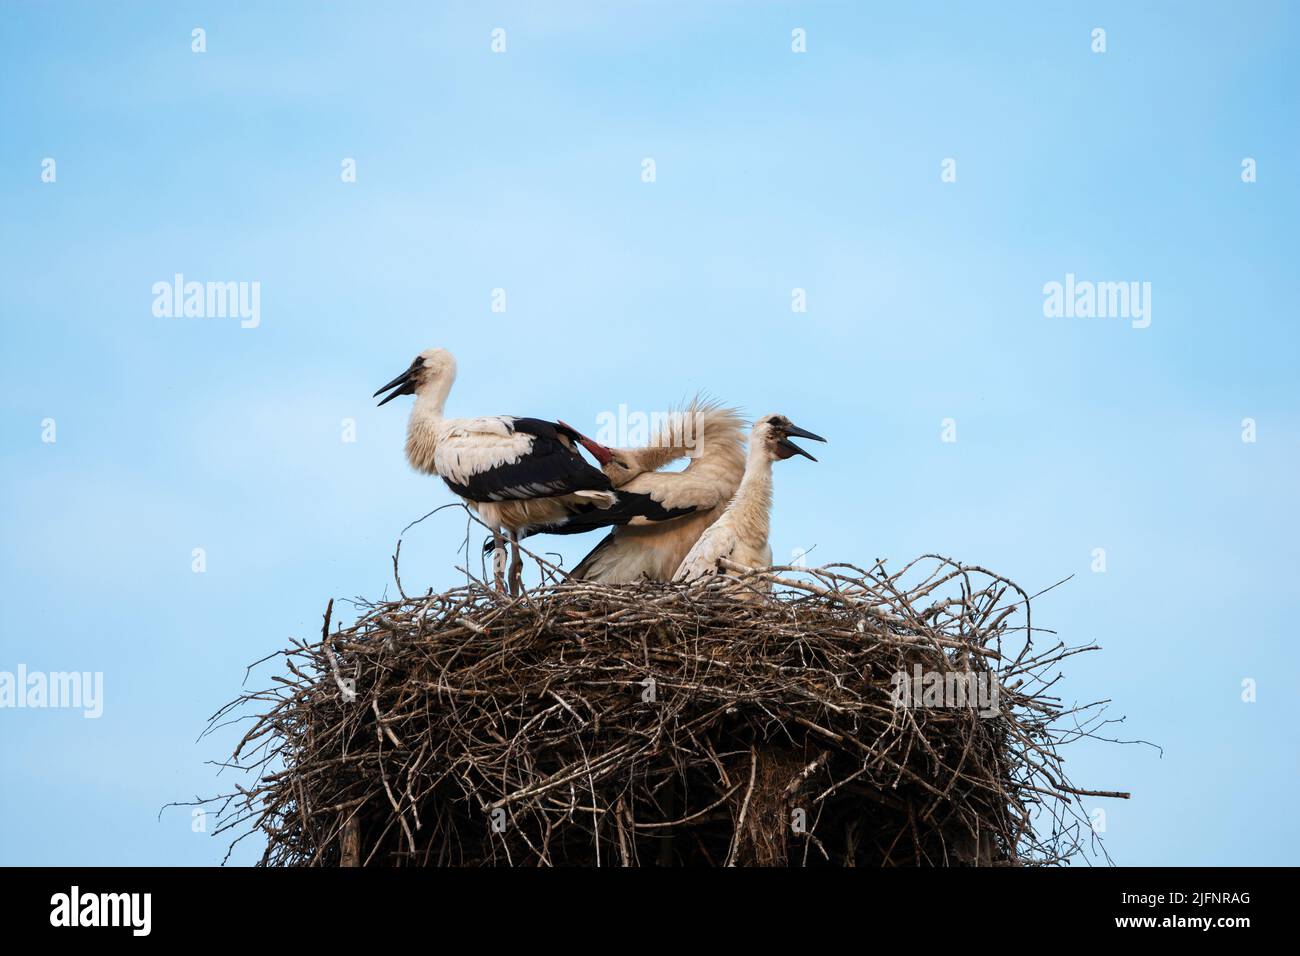 Family of storks in the nest on blue sky background Stock Photo